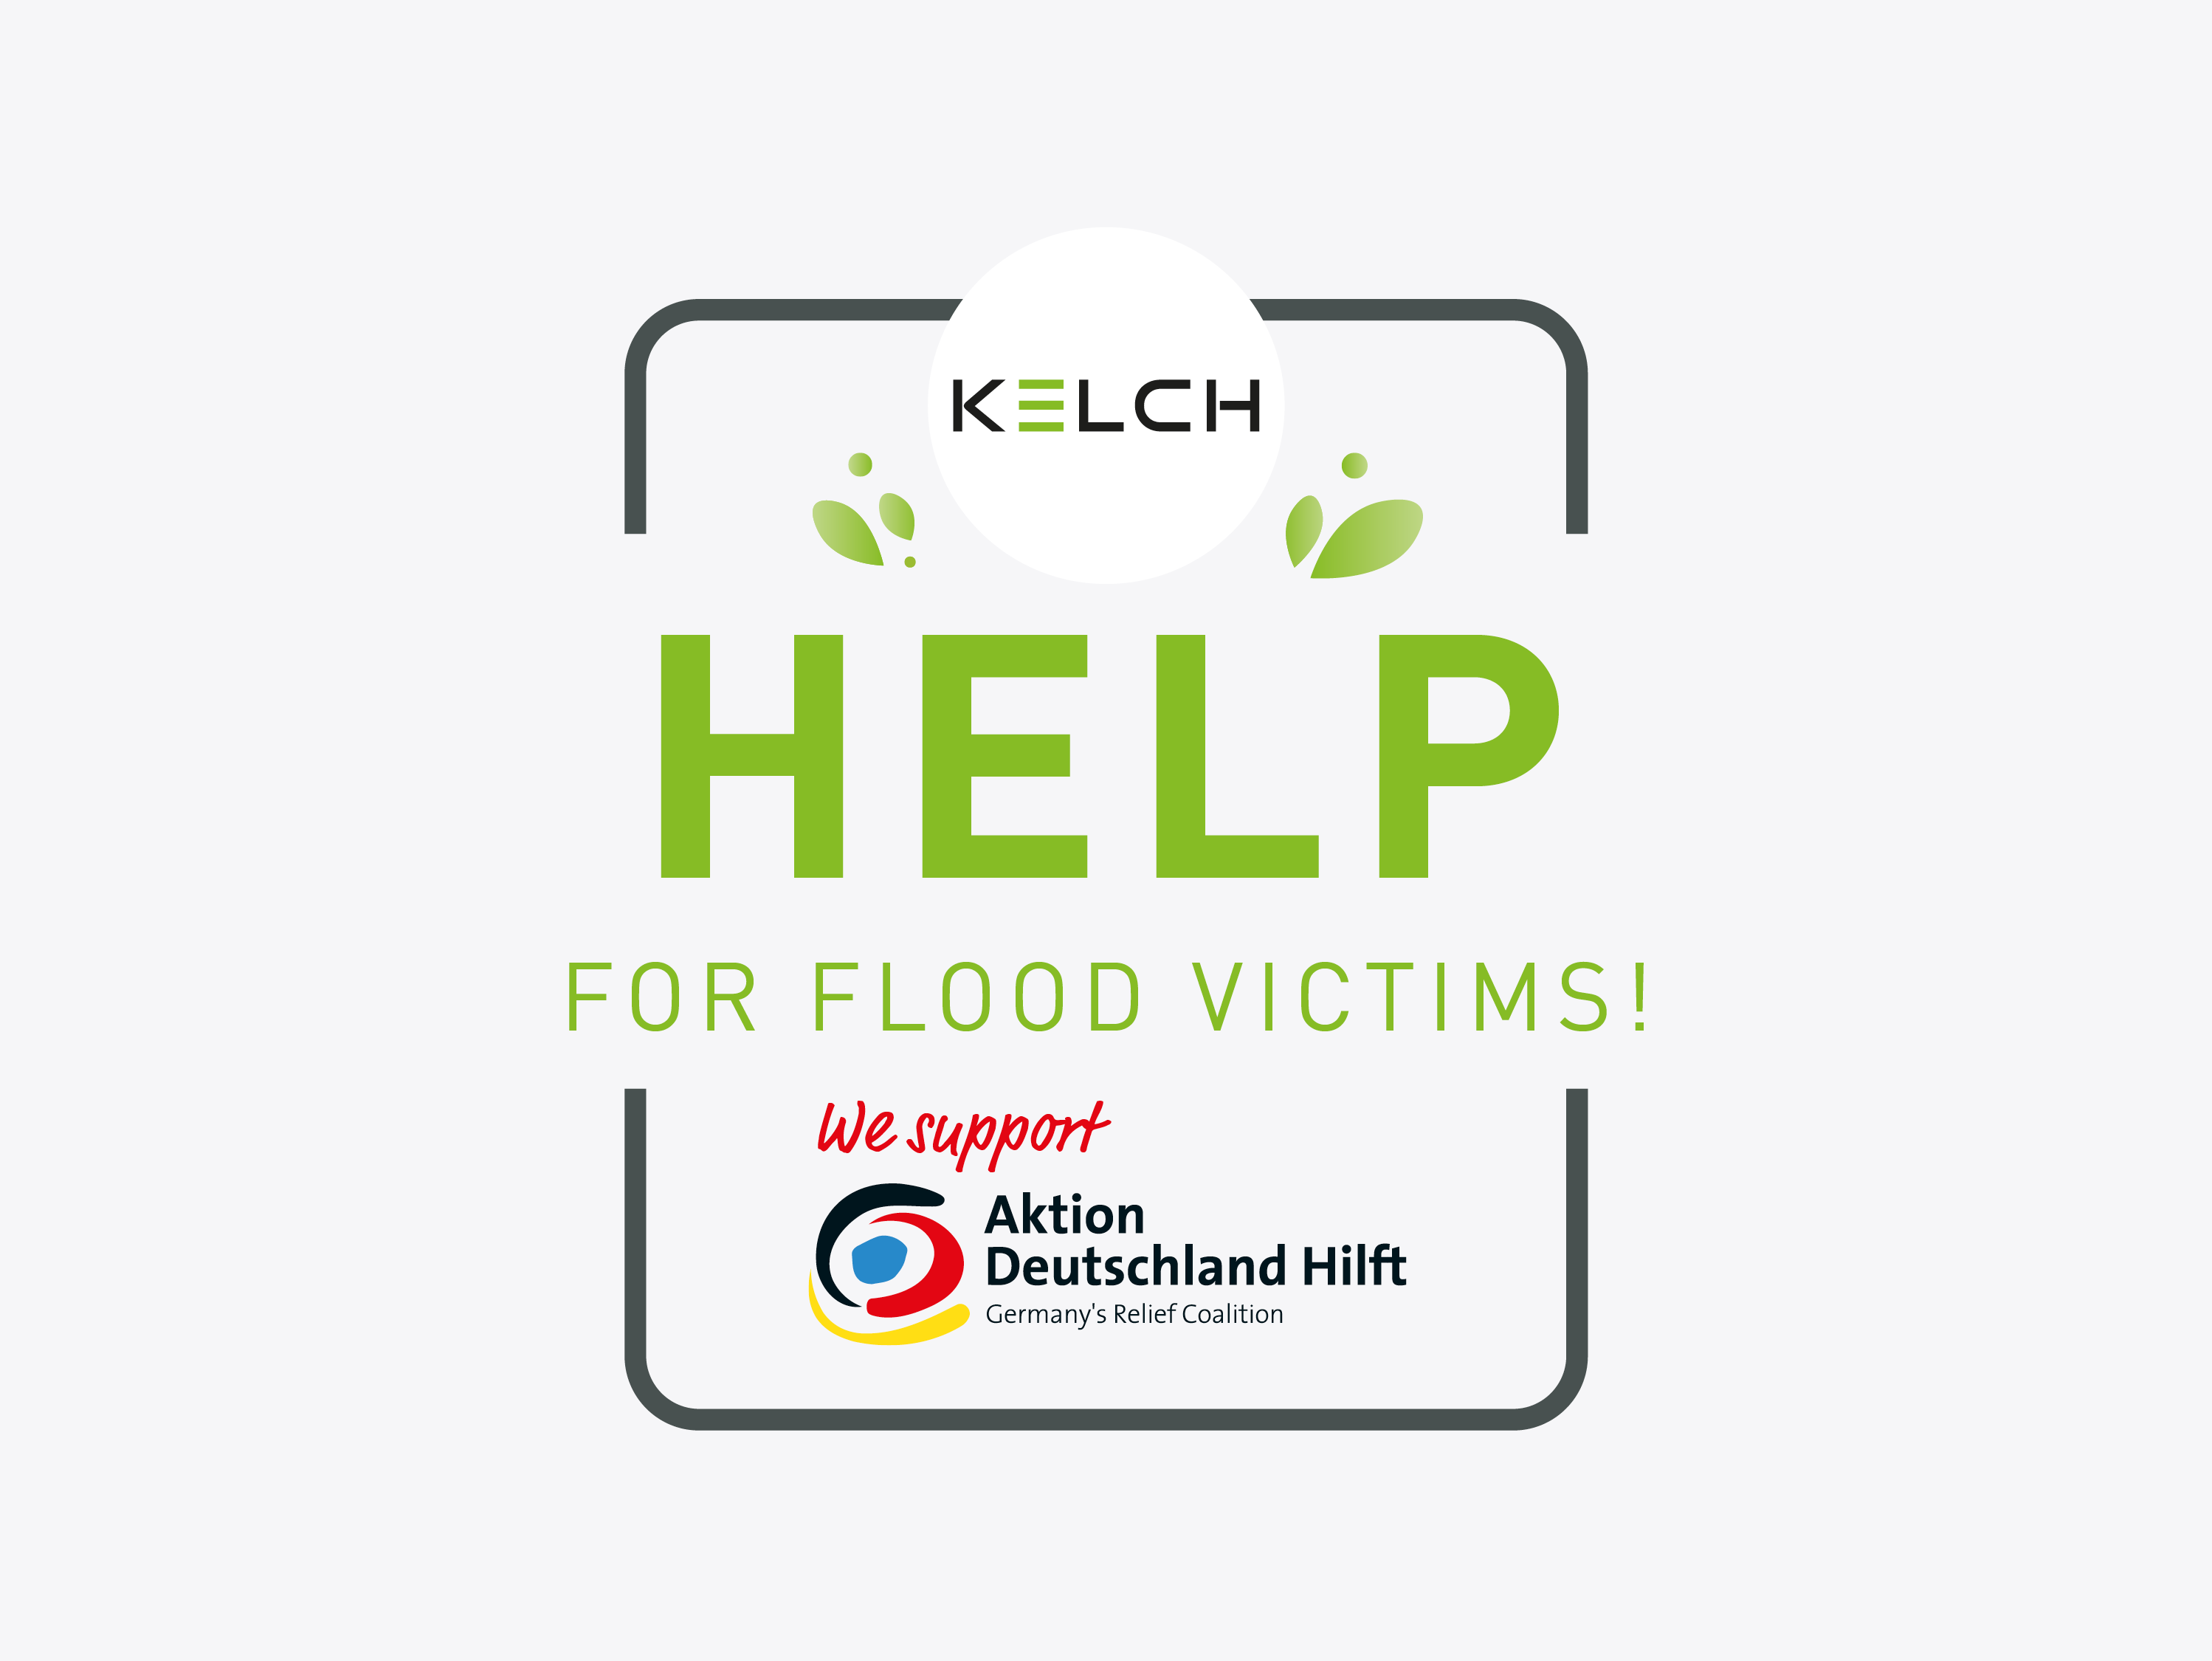 KELCH helps flood victims and supports the aid organisation Aktion Deutschland hilft.